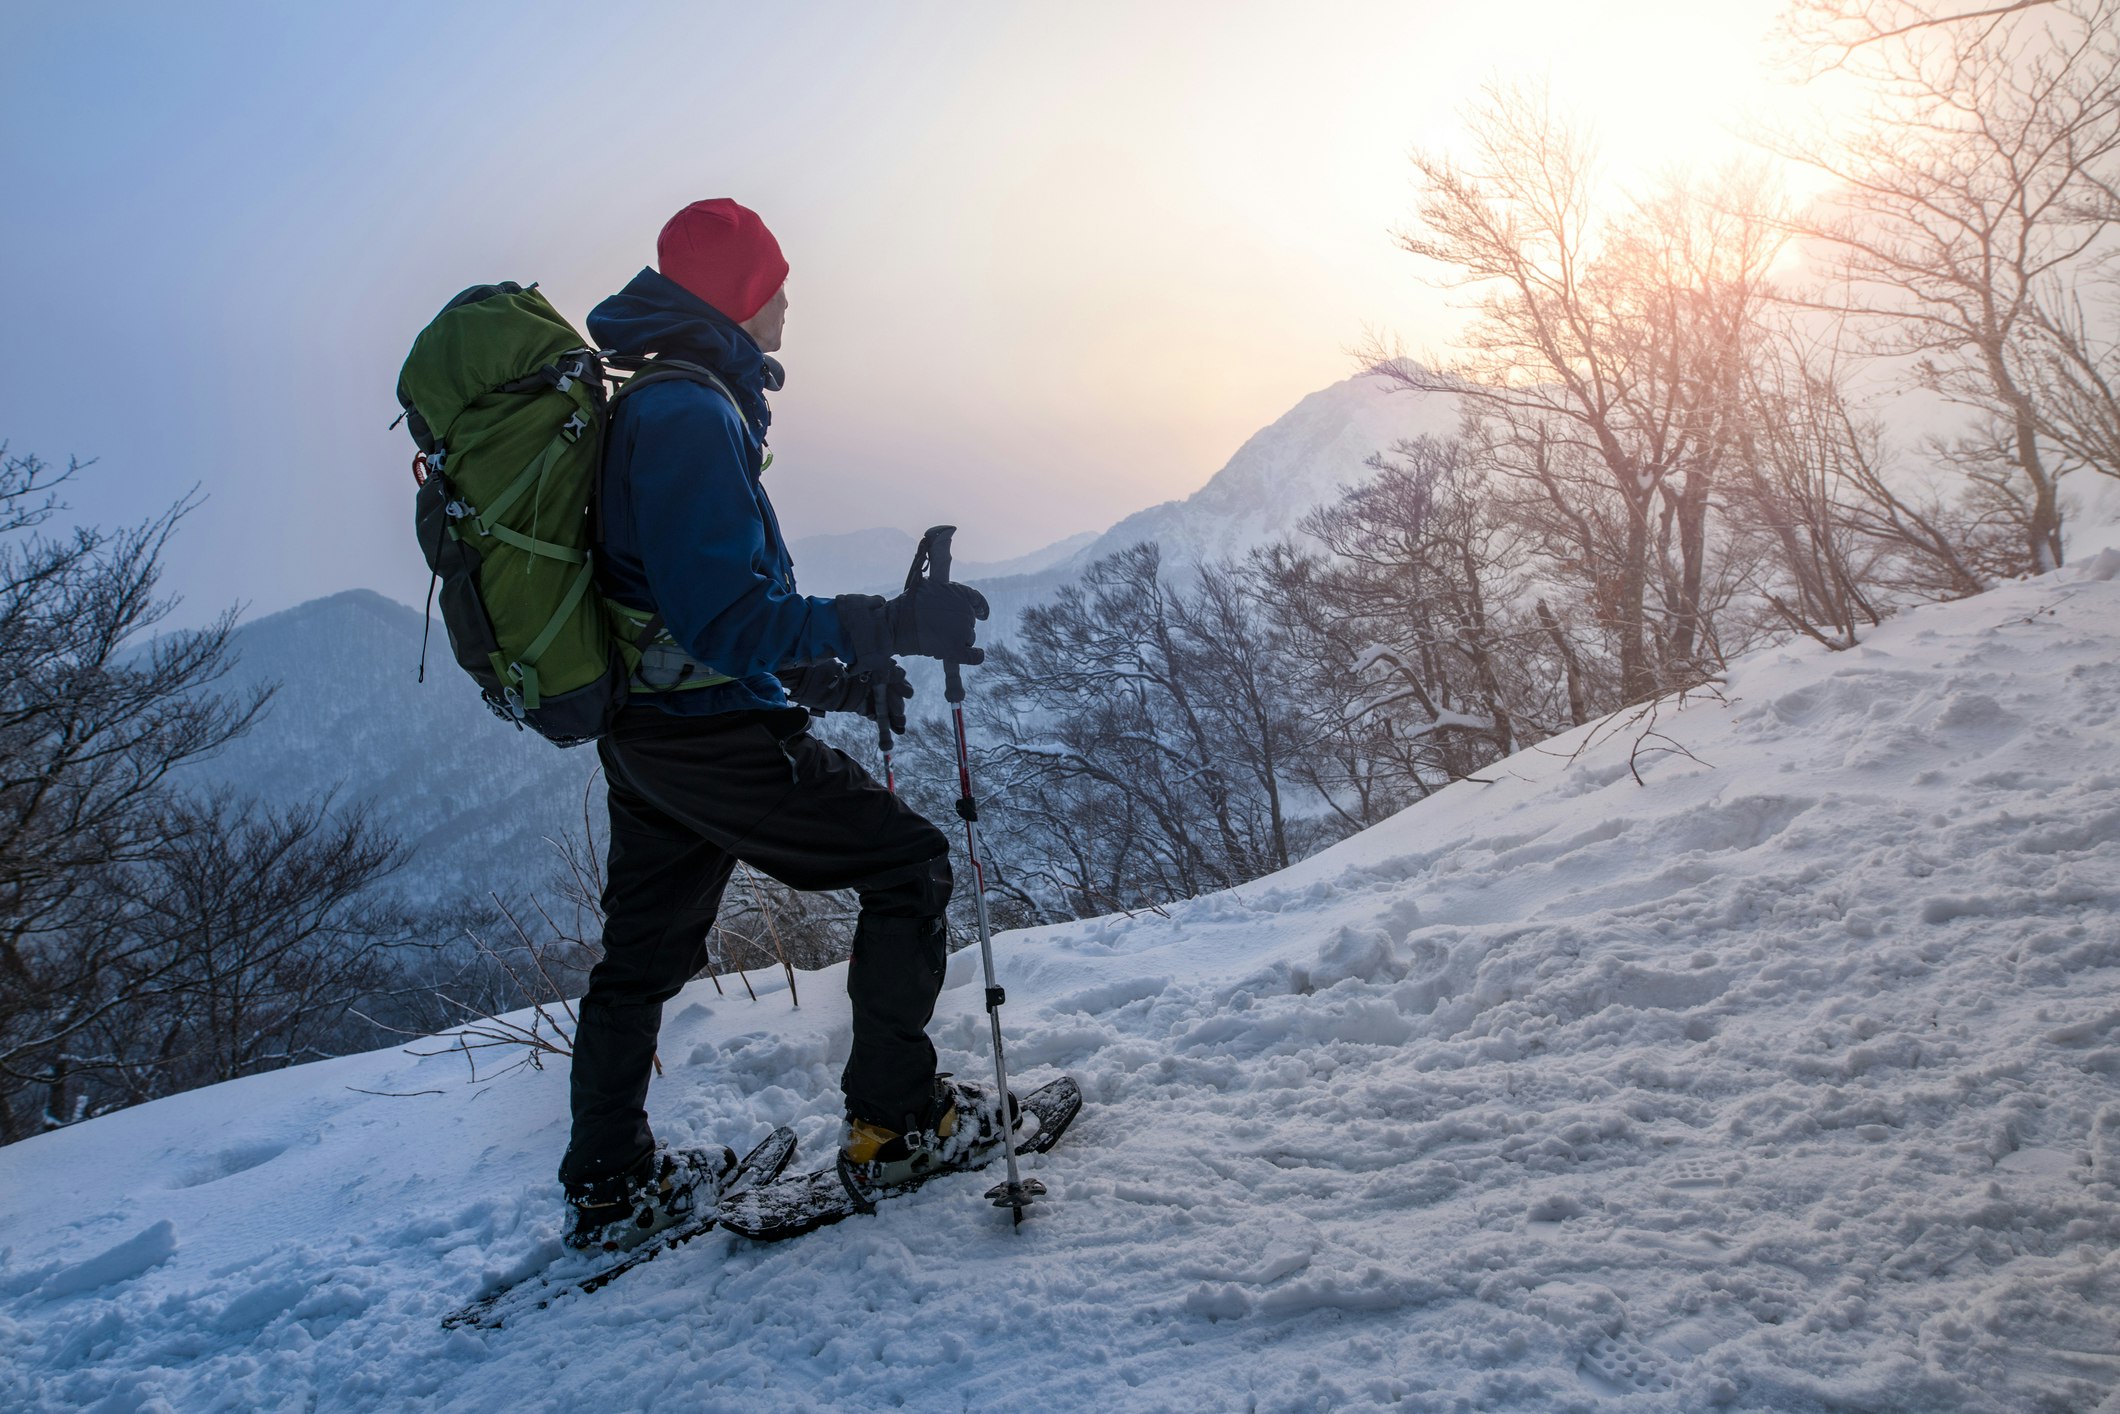 A man pauses as he snowshoes at sunrise on Mt. Daisen. He is wearing a red knit hat, a blue windproof ski jacket, has a olive green sixty liter backpack on, and is turned away form the viewer to admire the sun rising over a nearby peak